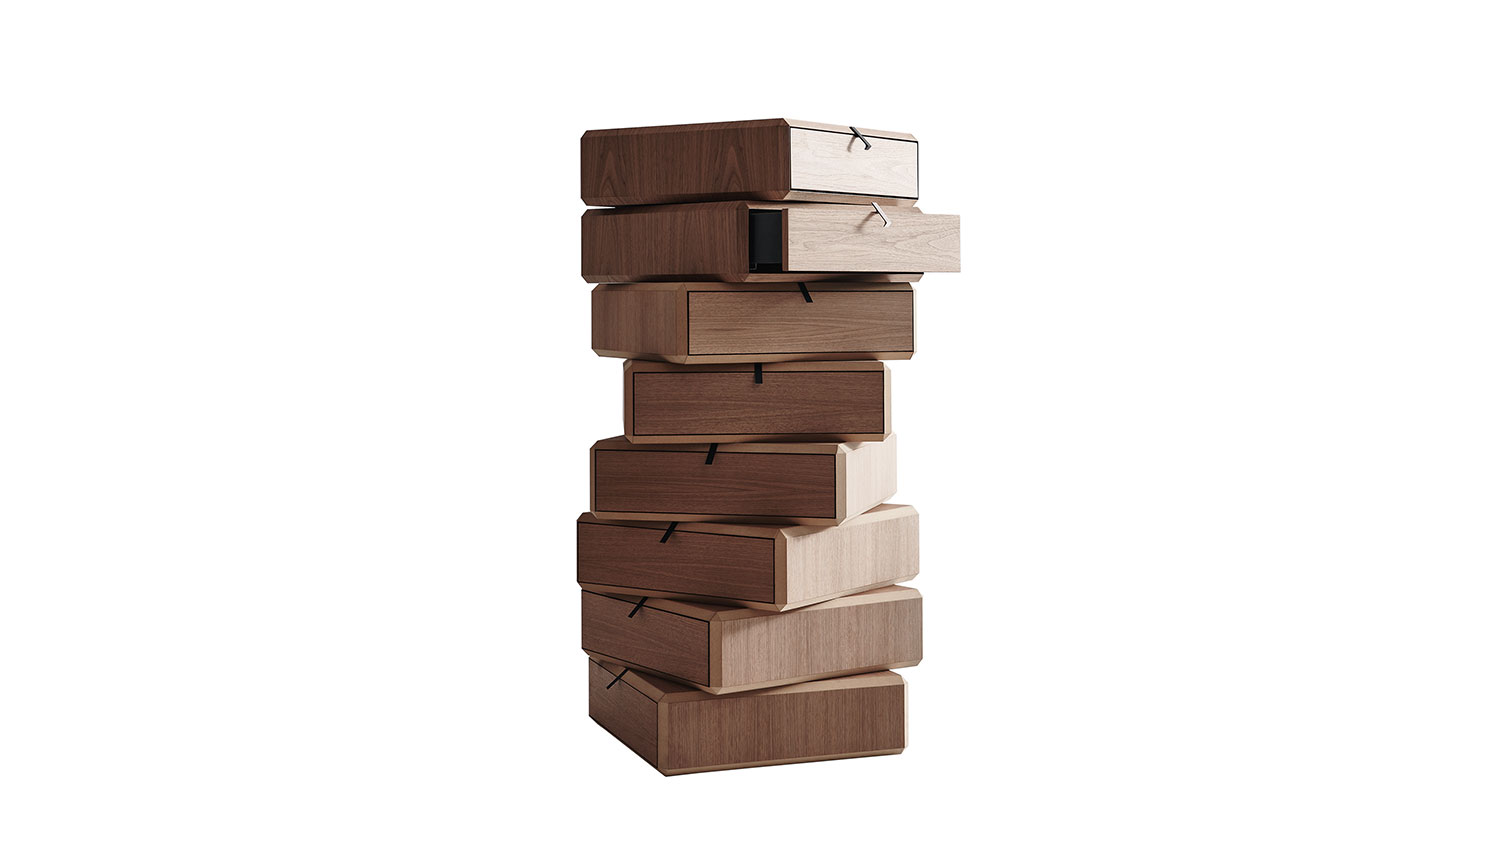 A rotating pile of drawer units in American walnut